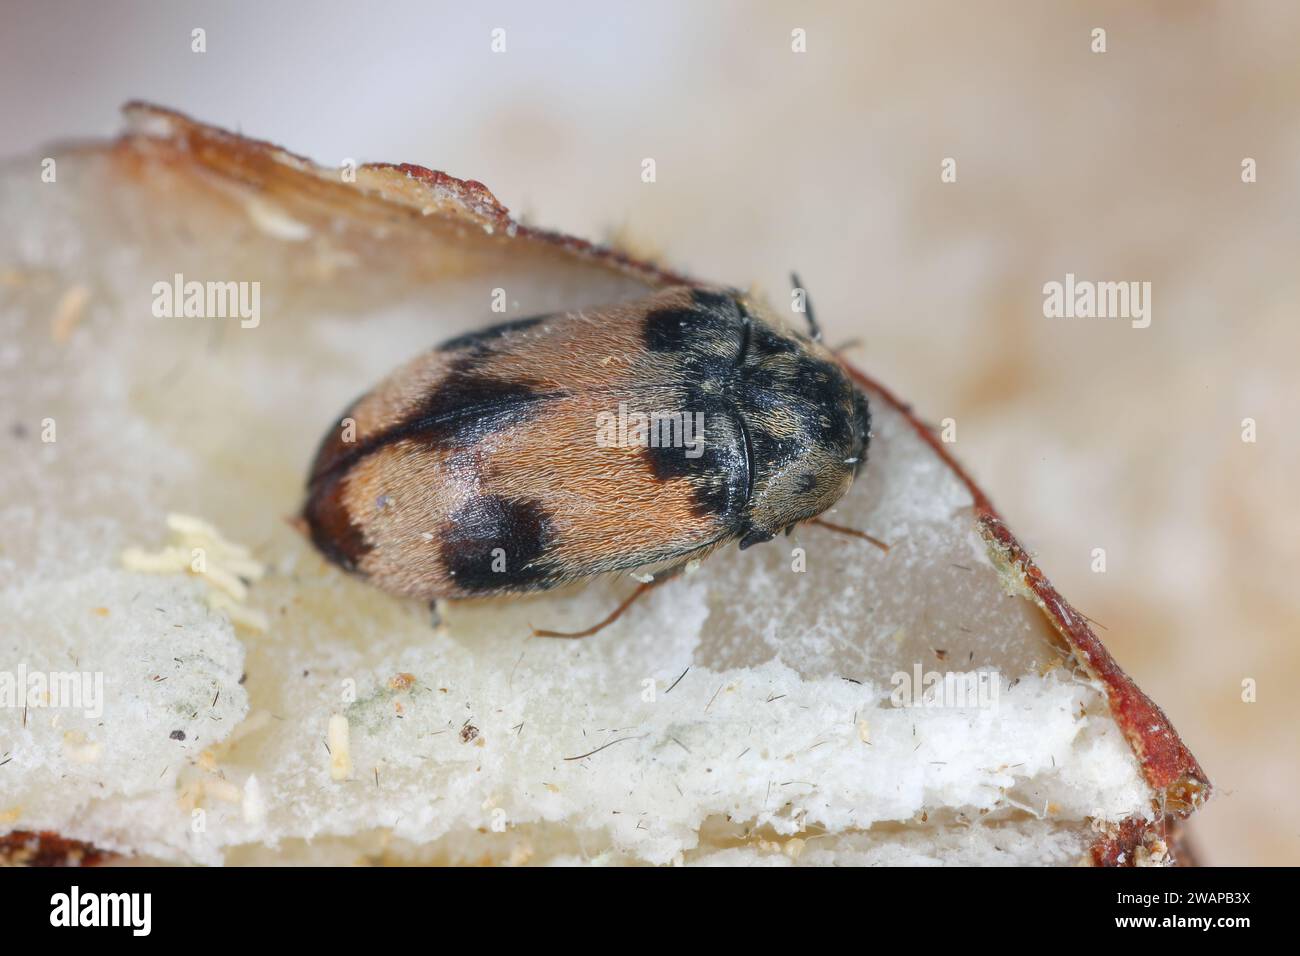 Attagenus bifasciatus, Carpet beetle. Beetles and larvae feed on food products and waste. Male beetle in the bread. Stock Photo